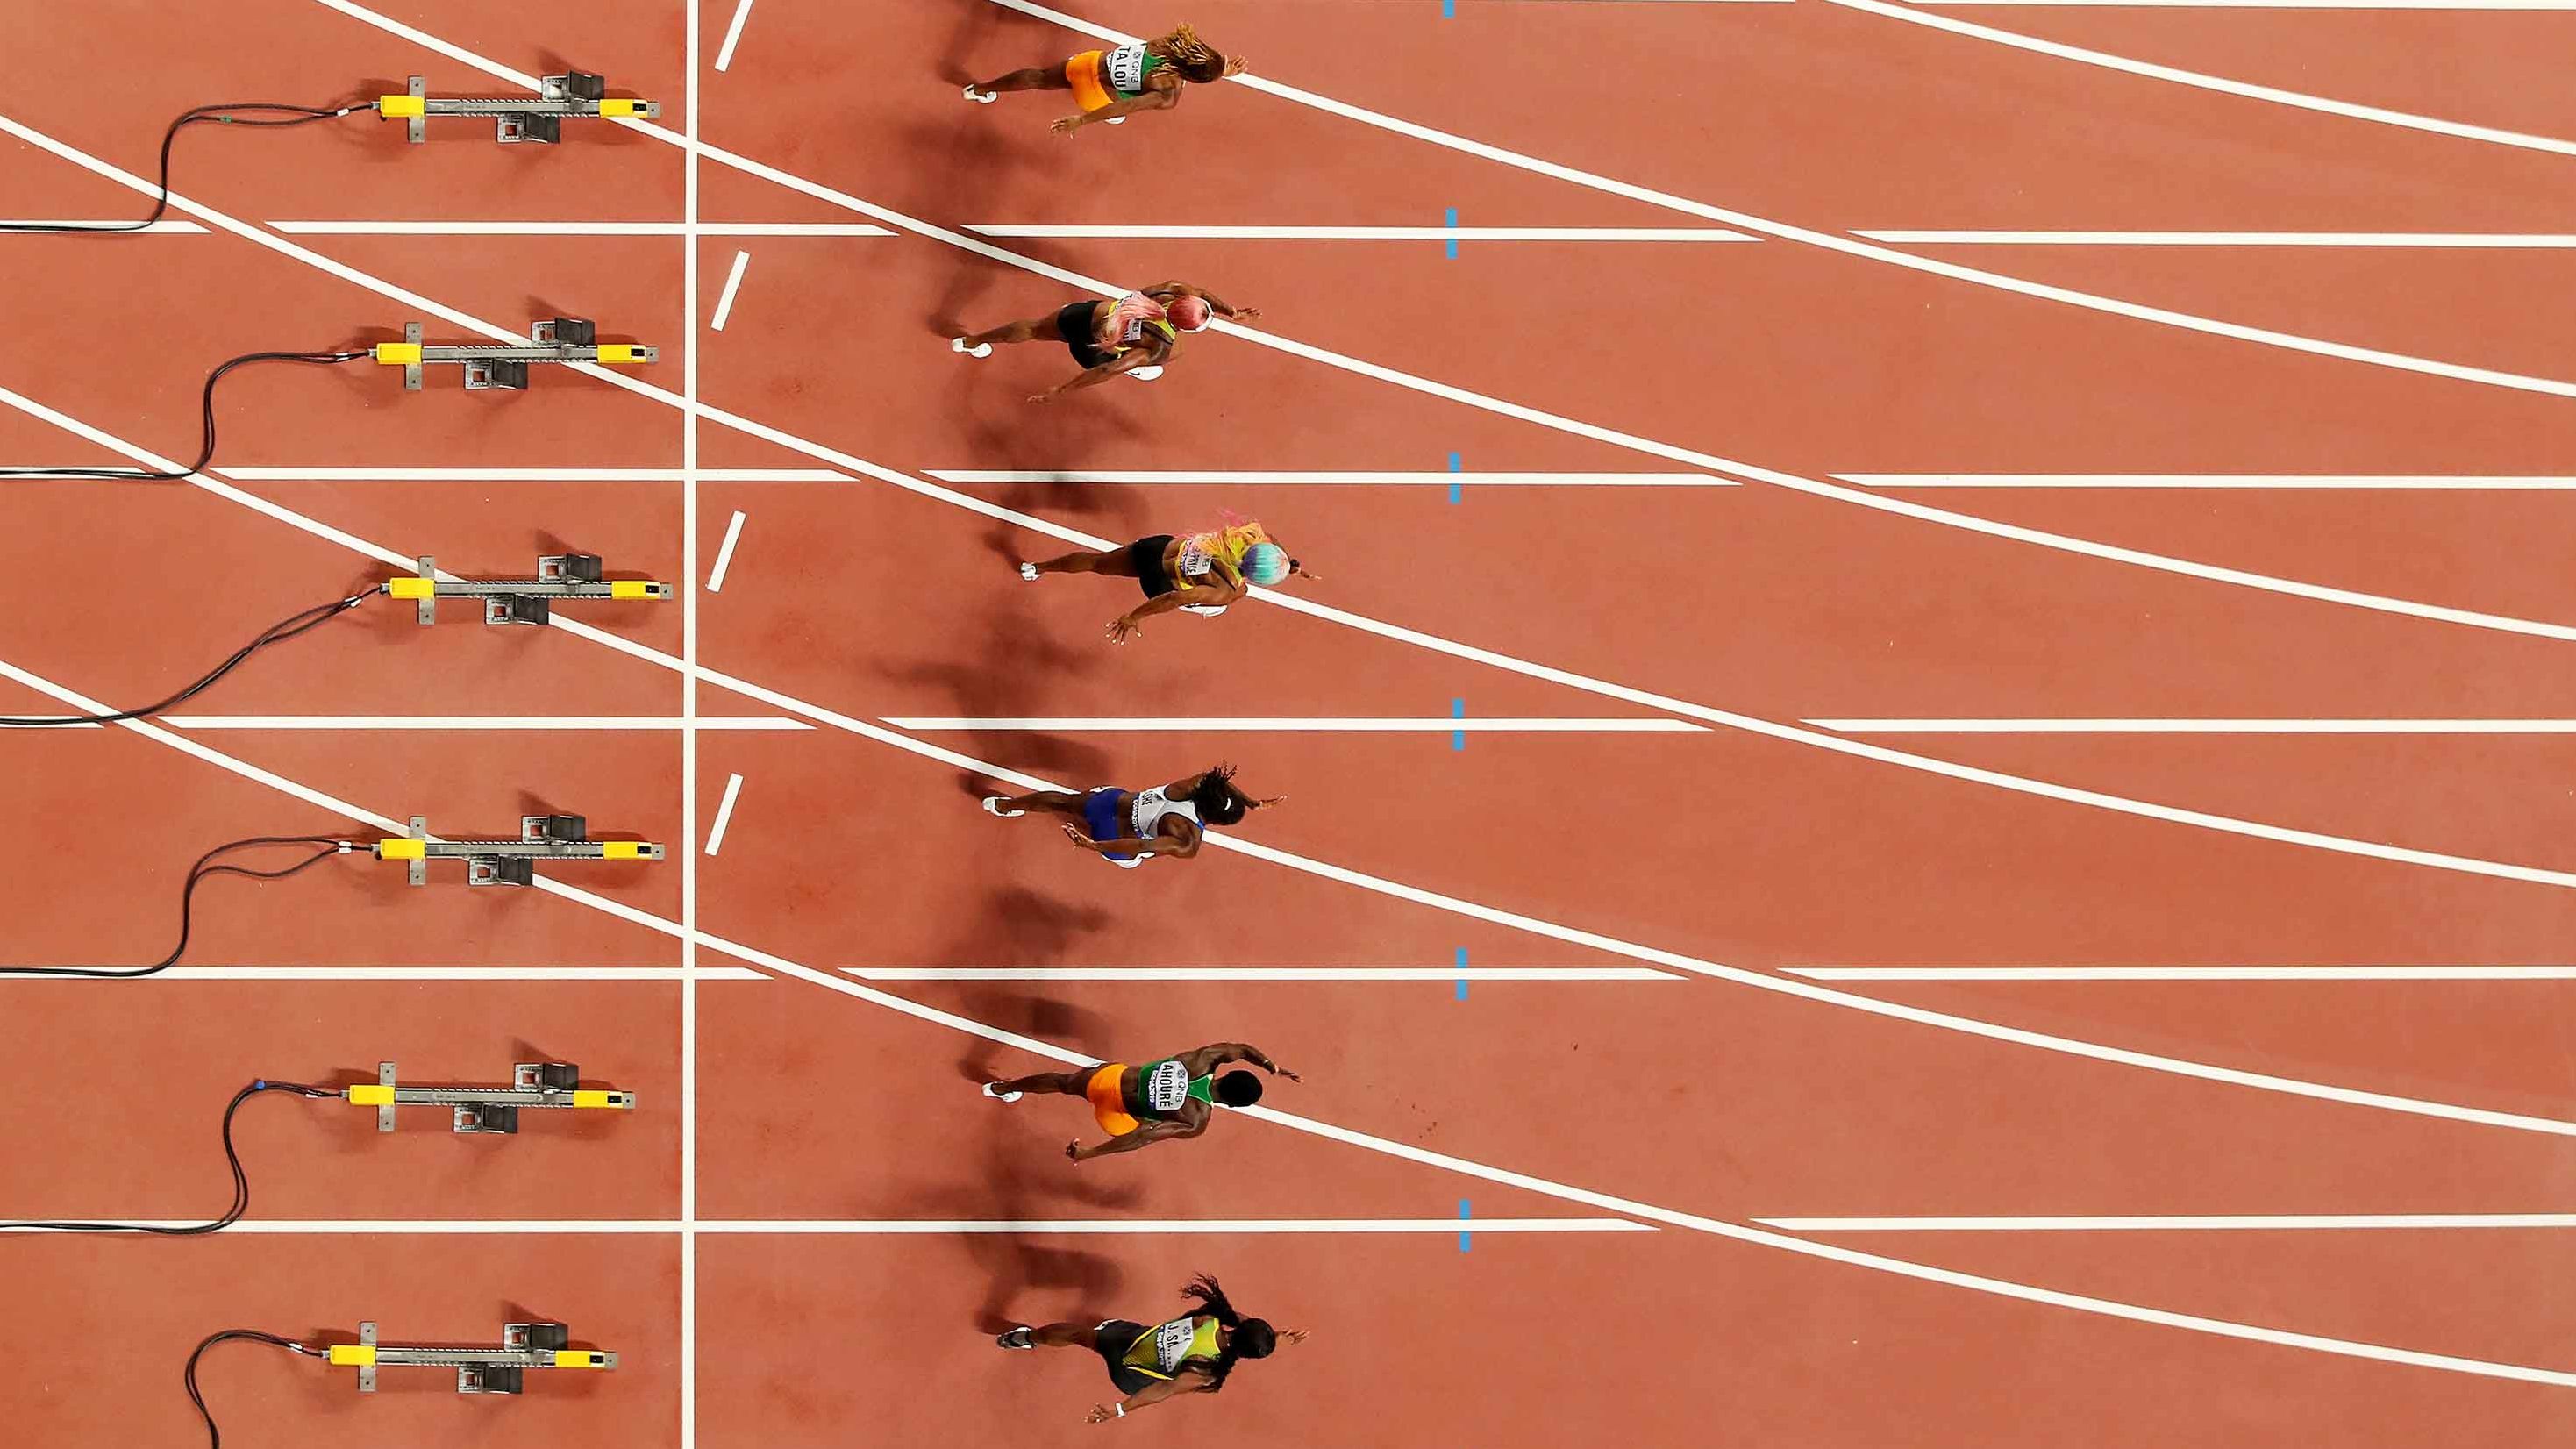 The starting-block cameras were used in the 100 meters and hurdle sprints.